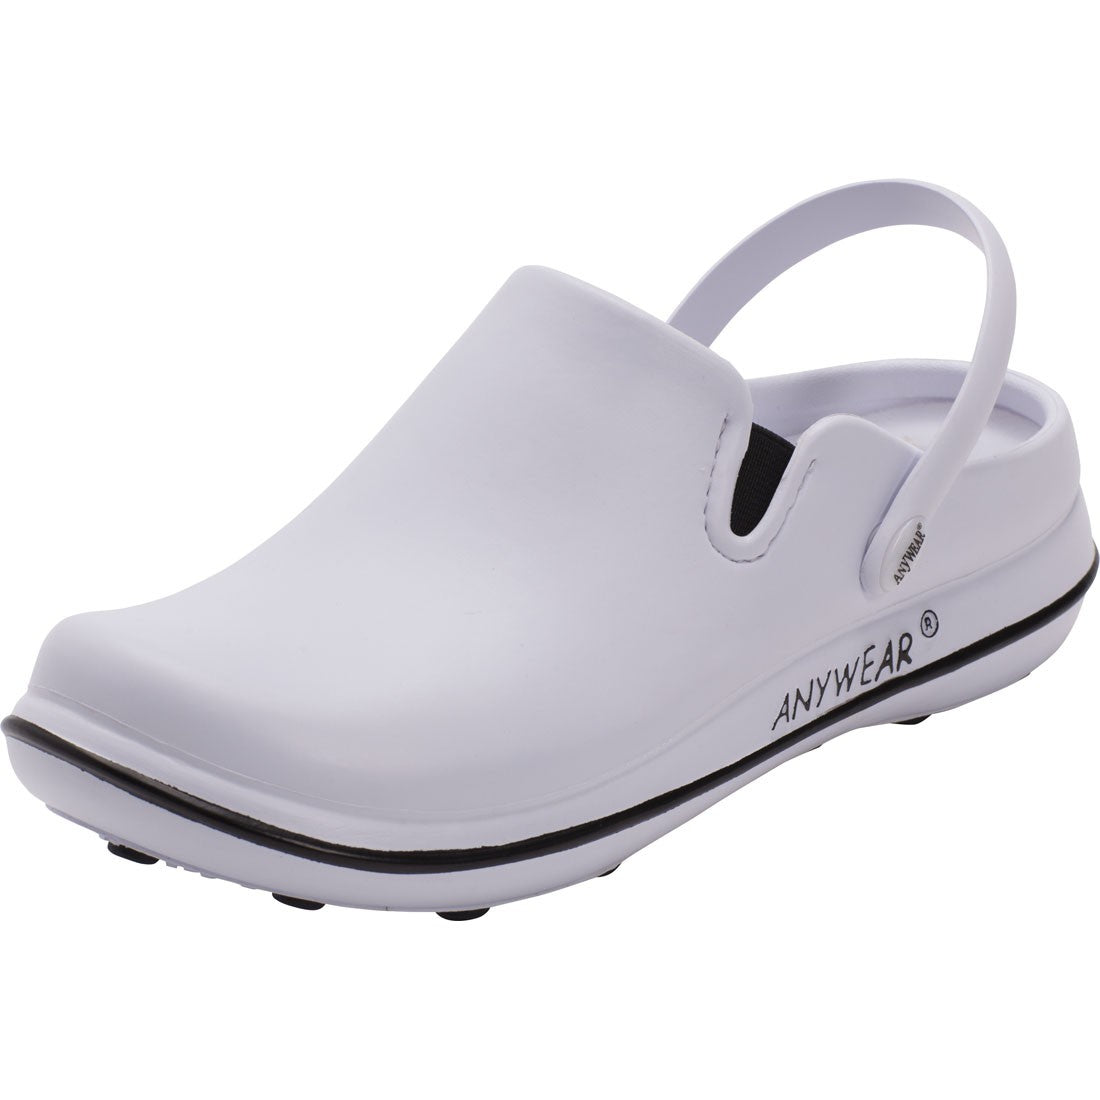 Anywear Alexis Clogs, White, Size 6-Pet's Choice Supply